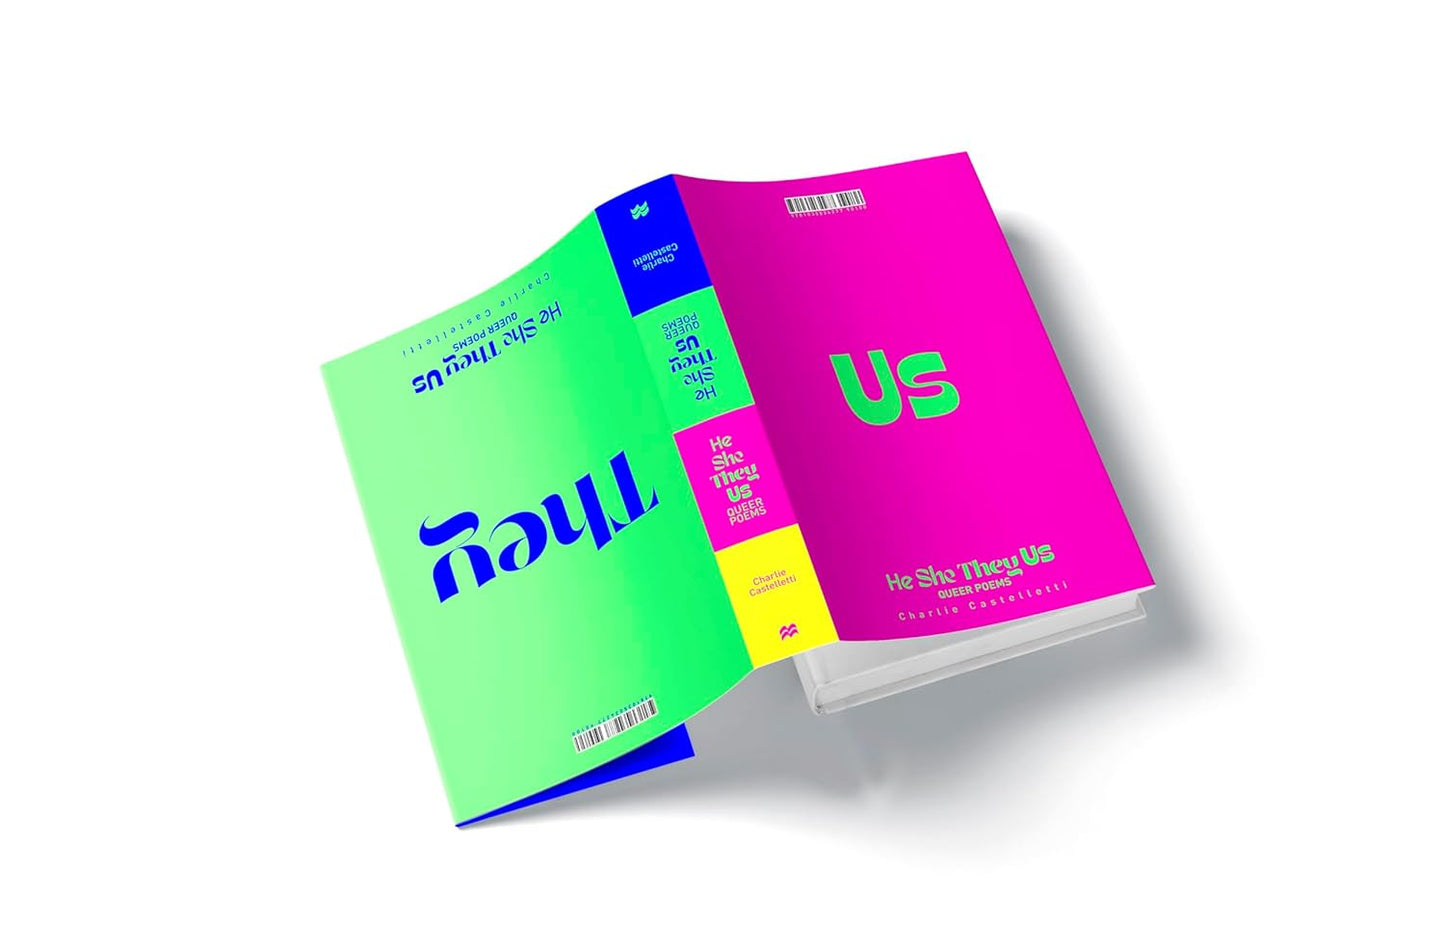 The hardback book He, She, They, Us has a reversible cover. One side of the cover is bright pink with the pronoun "Us" written in bold green text, while the other side has a neon green background with the pronoun "They" written in dark blue.